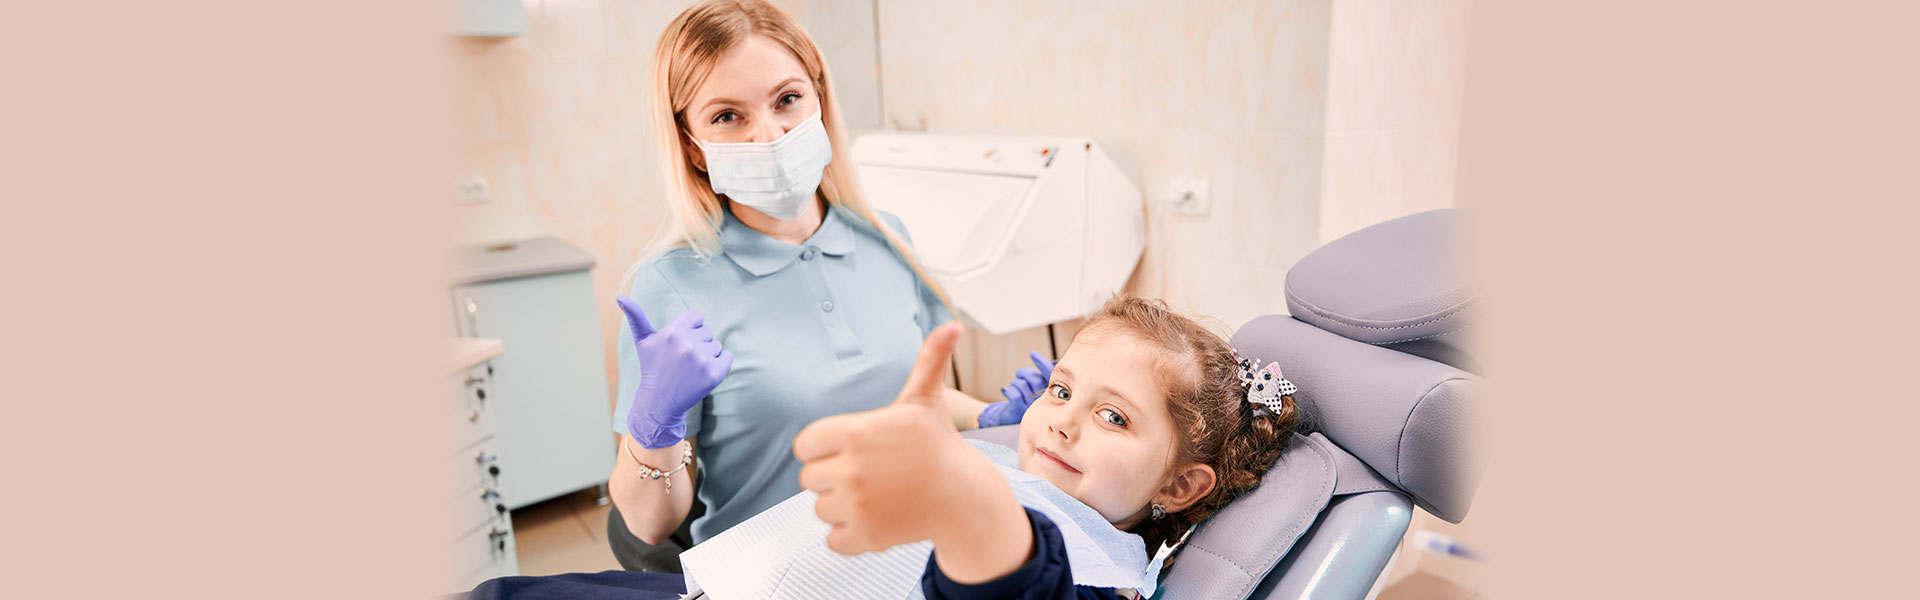 Does My Child Need Dental Sealants? Pros, Cons, and Costs